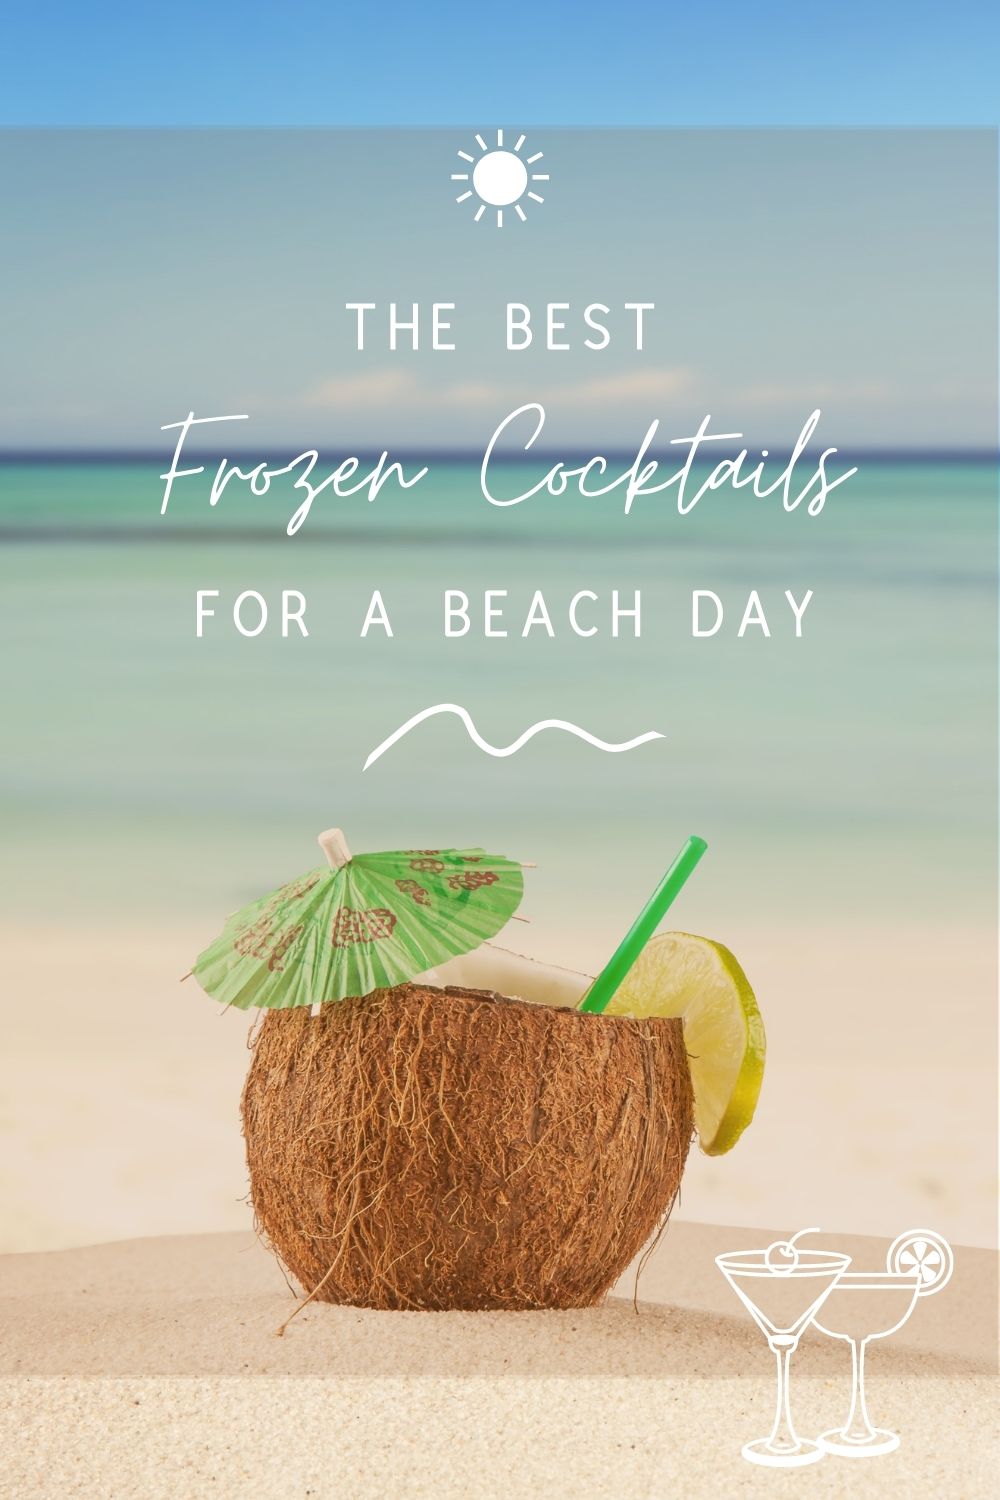 The Best Frozen Cocktails For A Beach Day